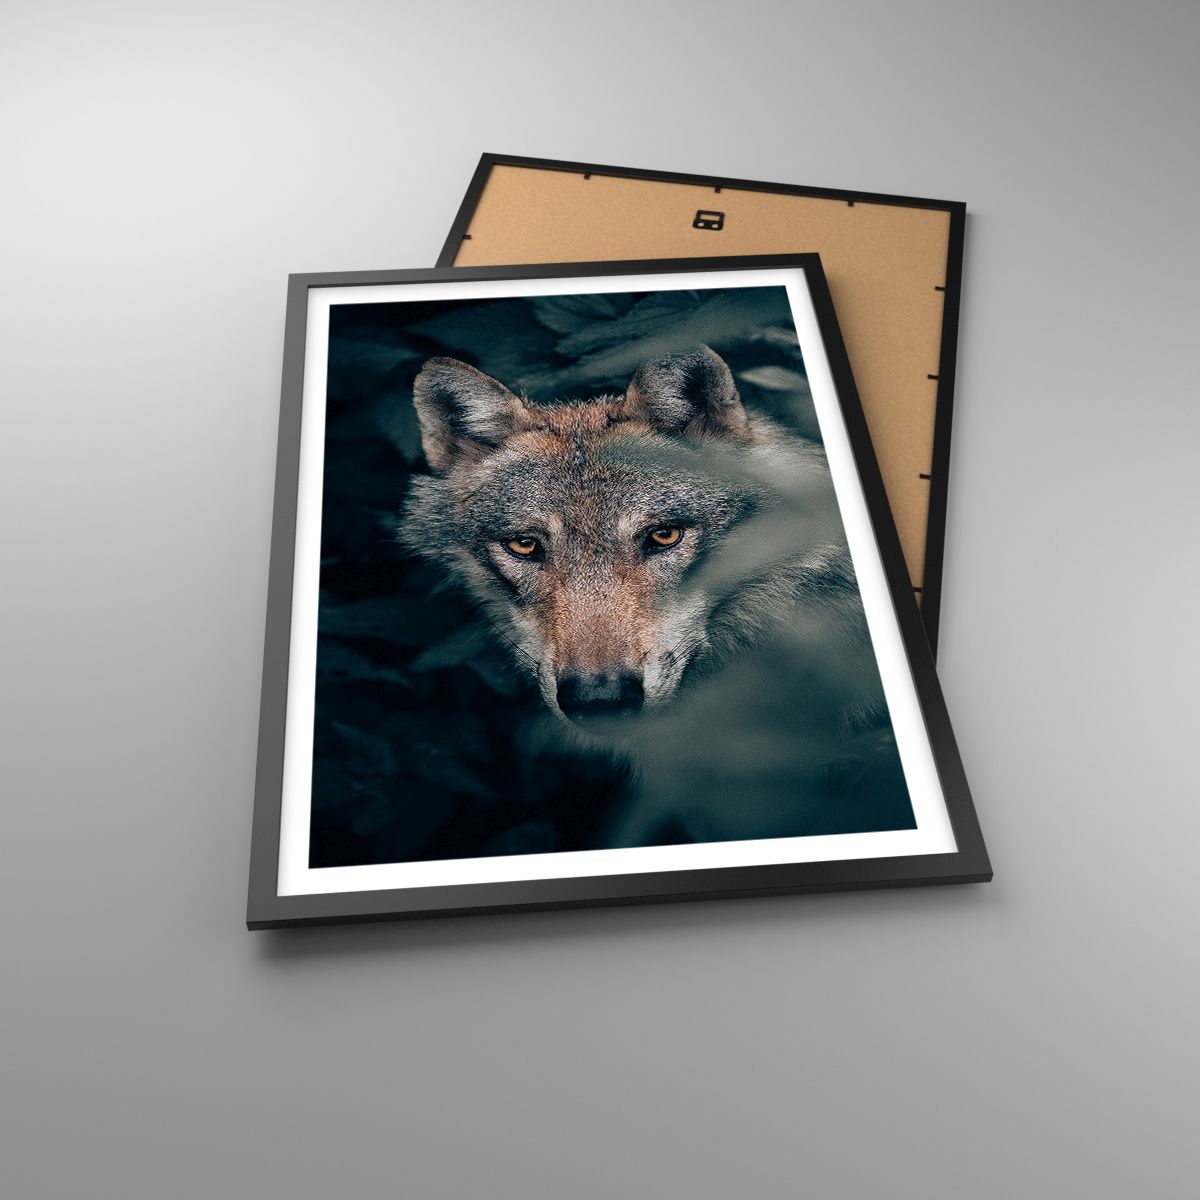 Poster Wolf, Poster Wald, Poster Tiere, Poster Raubtier, Poster Natur